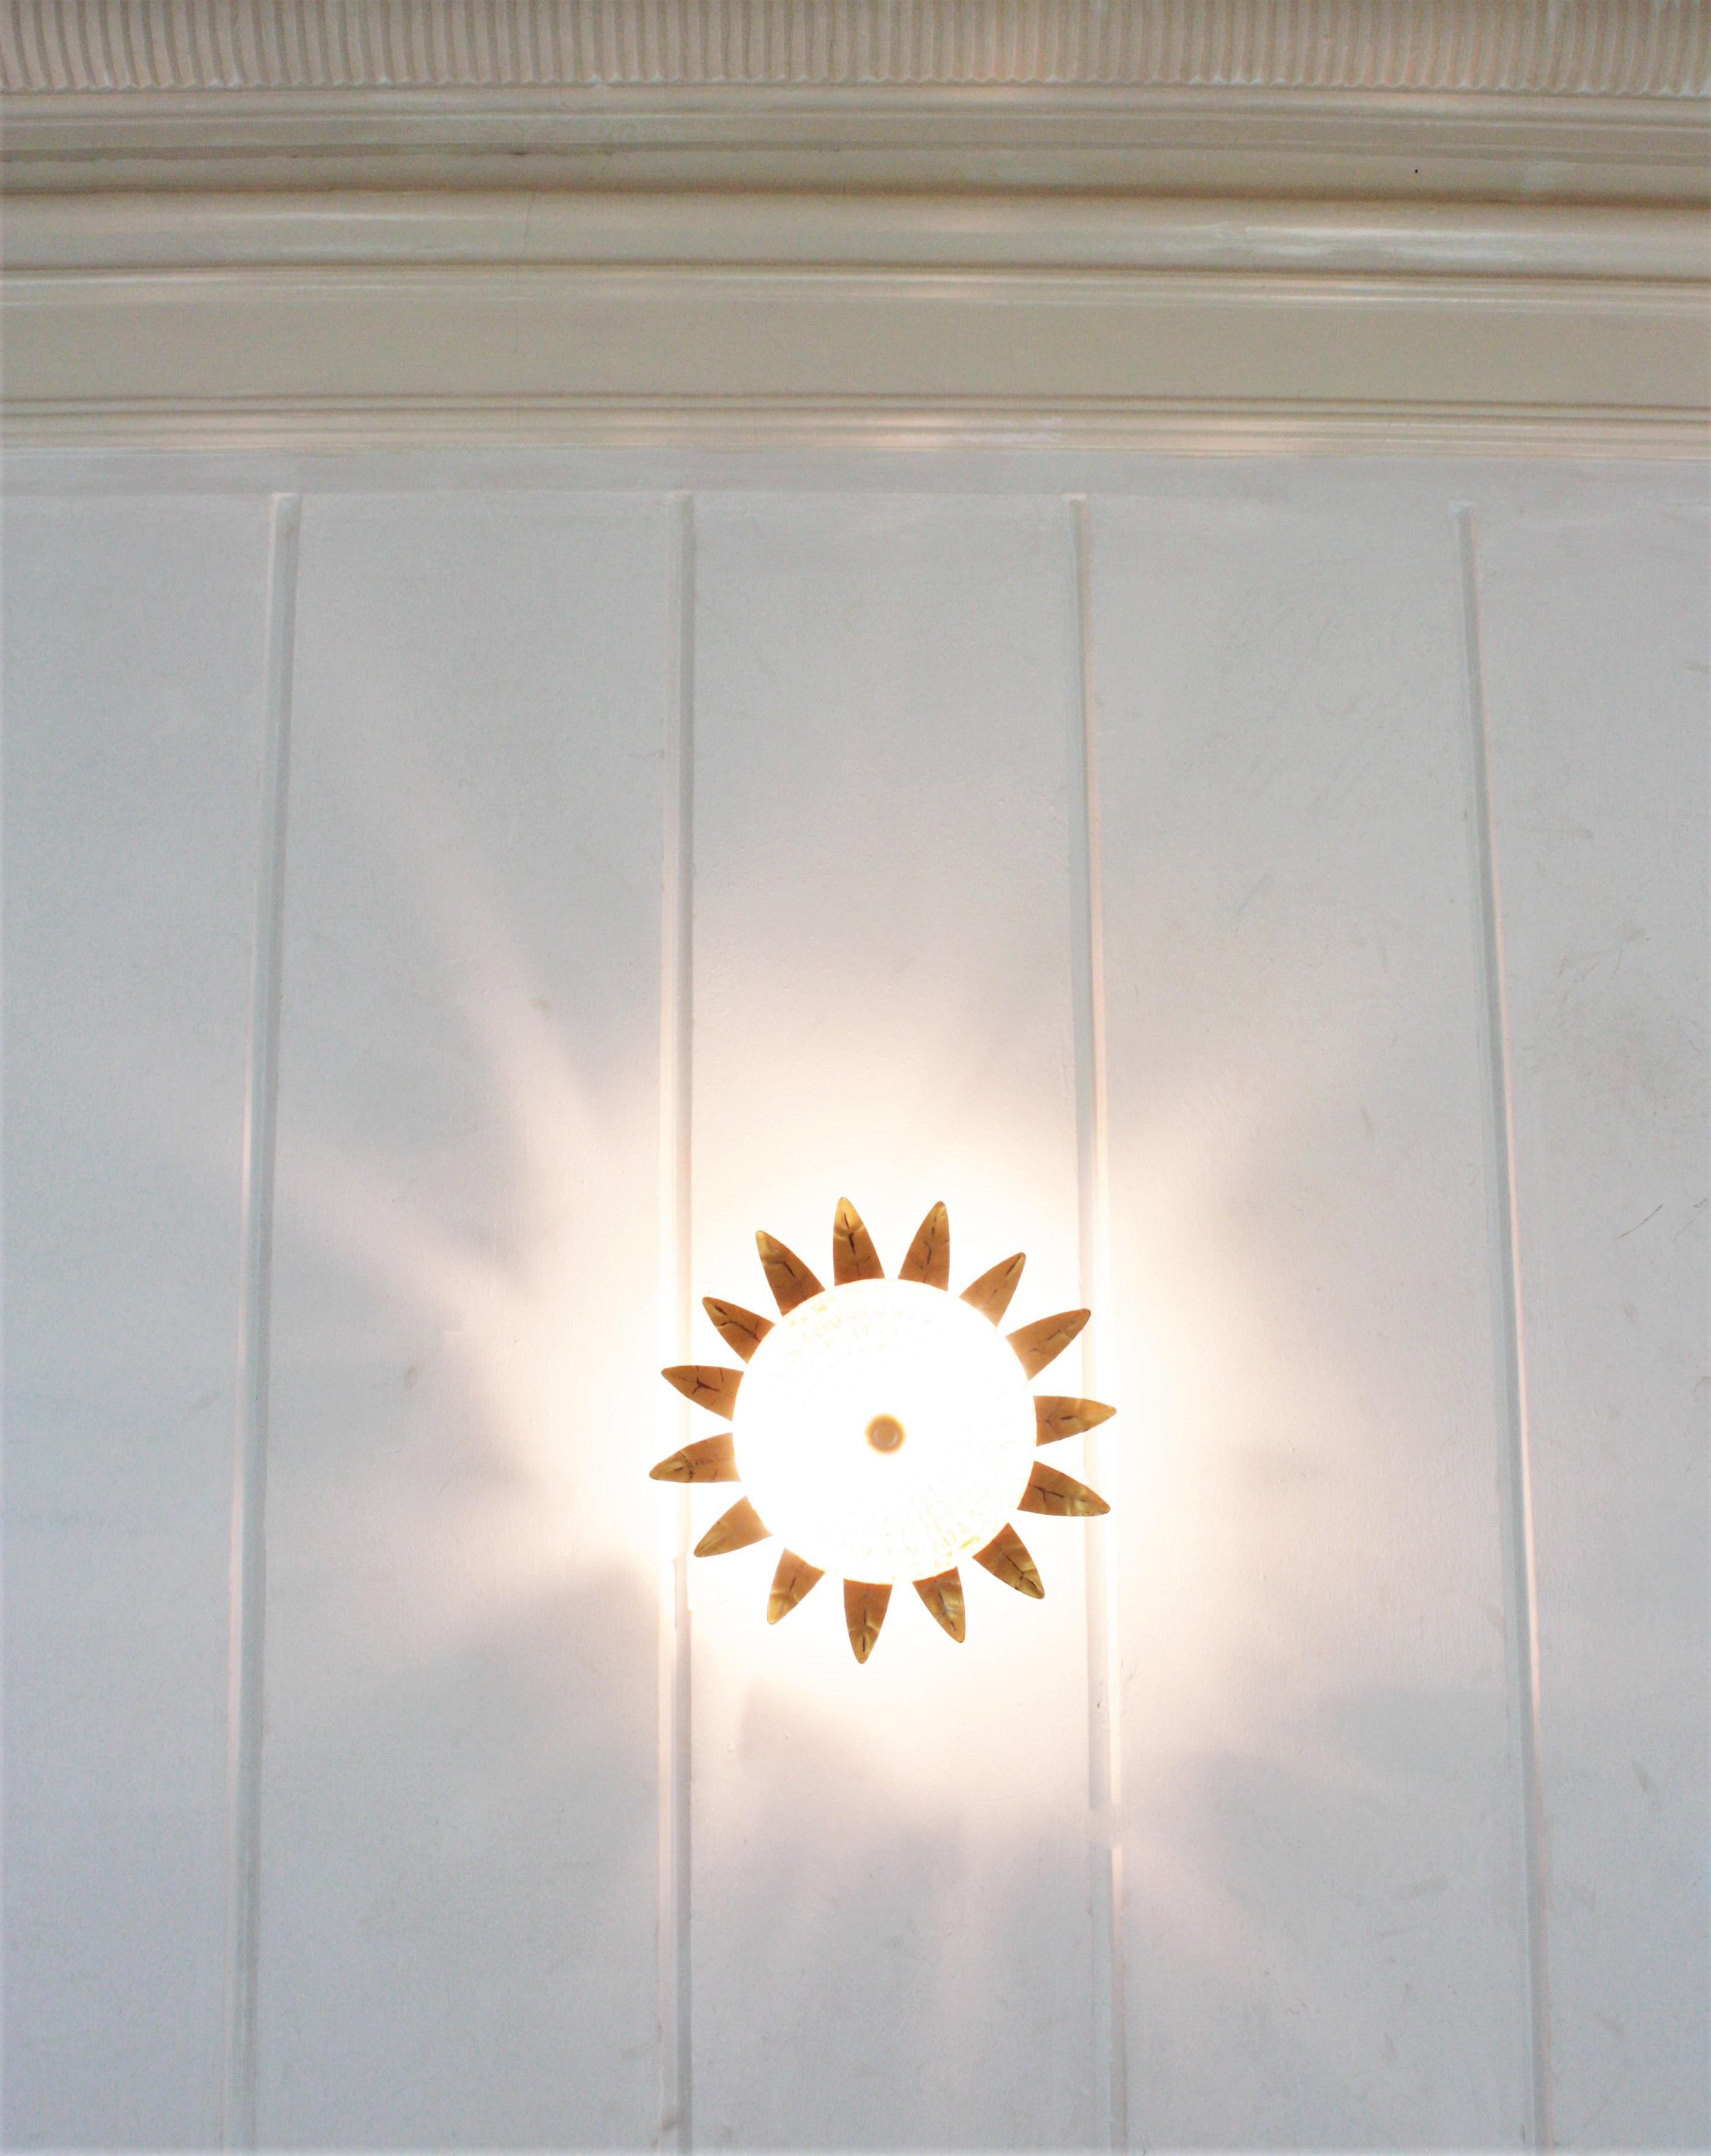 Sunburst Crown Light Fixture in Gilt Iron and Glass, 1950s For Sale 7